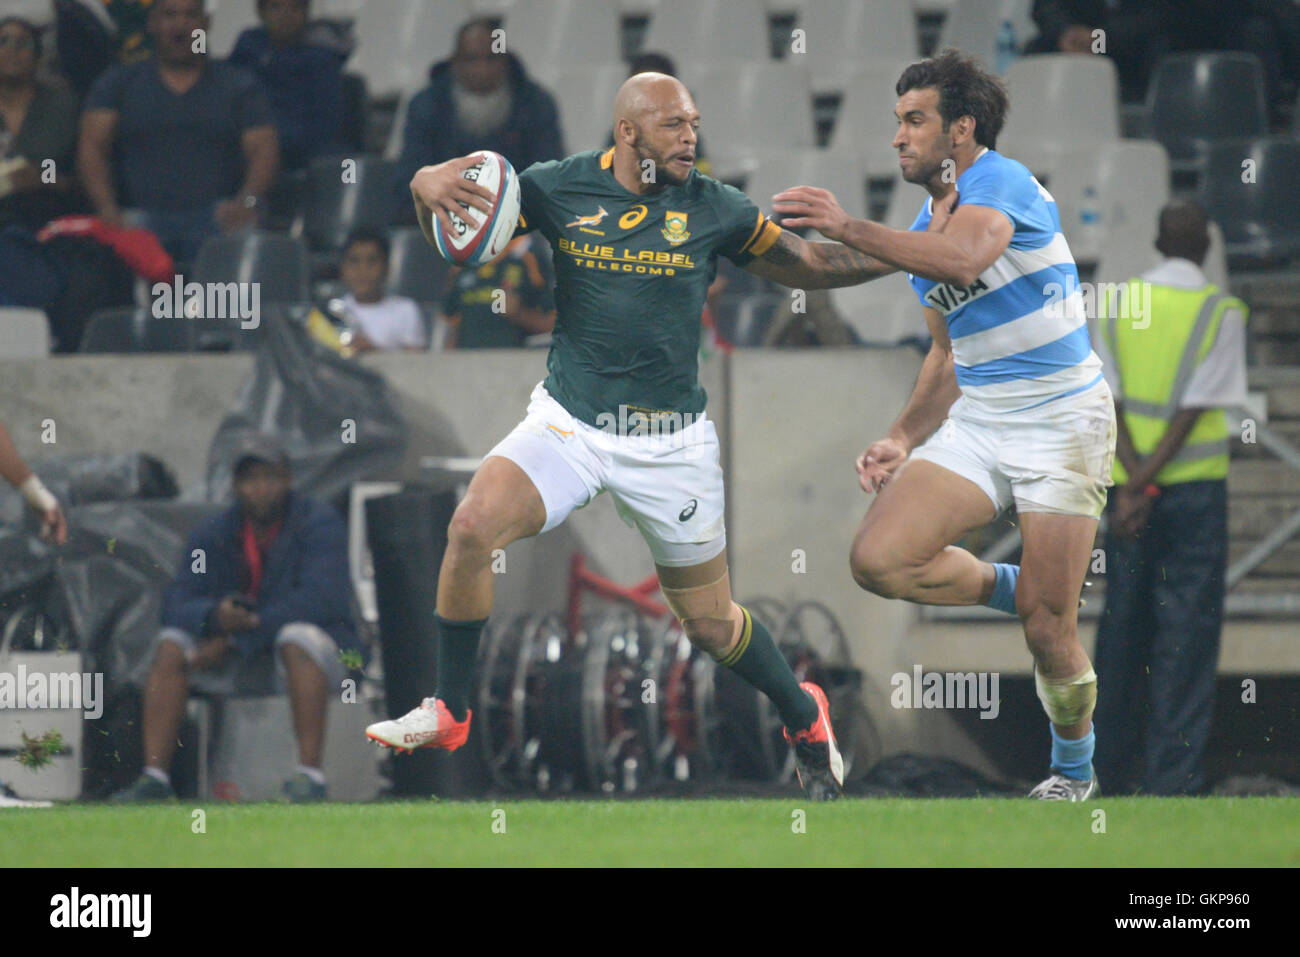 Nelspruit, South Africa. 20 August 2016. The South African National Rugby team in action against the Pumas at Mbombela Stadium. Lionel Mapoe fending off Matias Orlando of Argentina Stock Photo